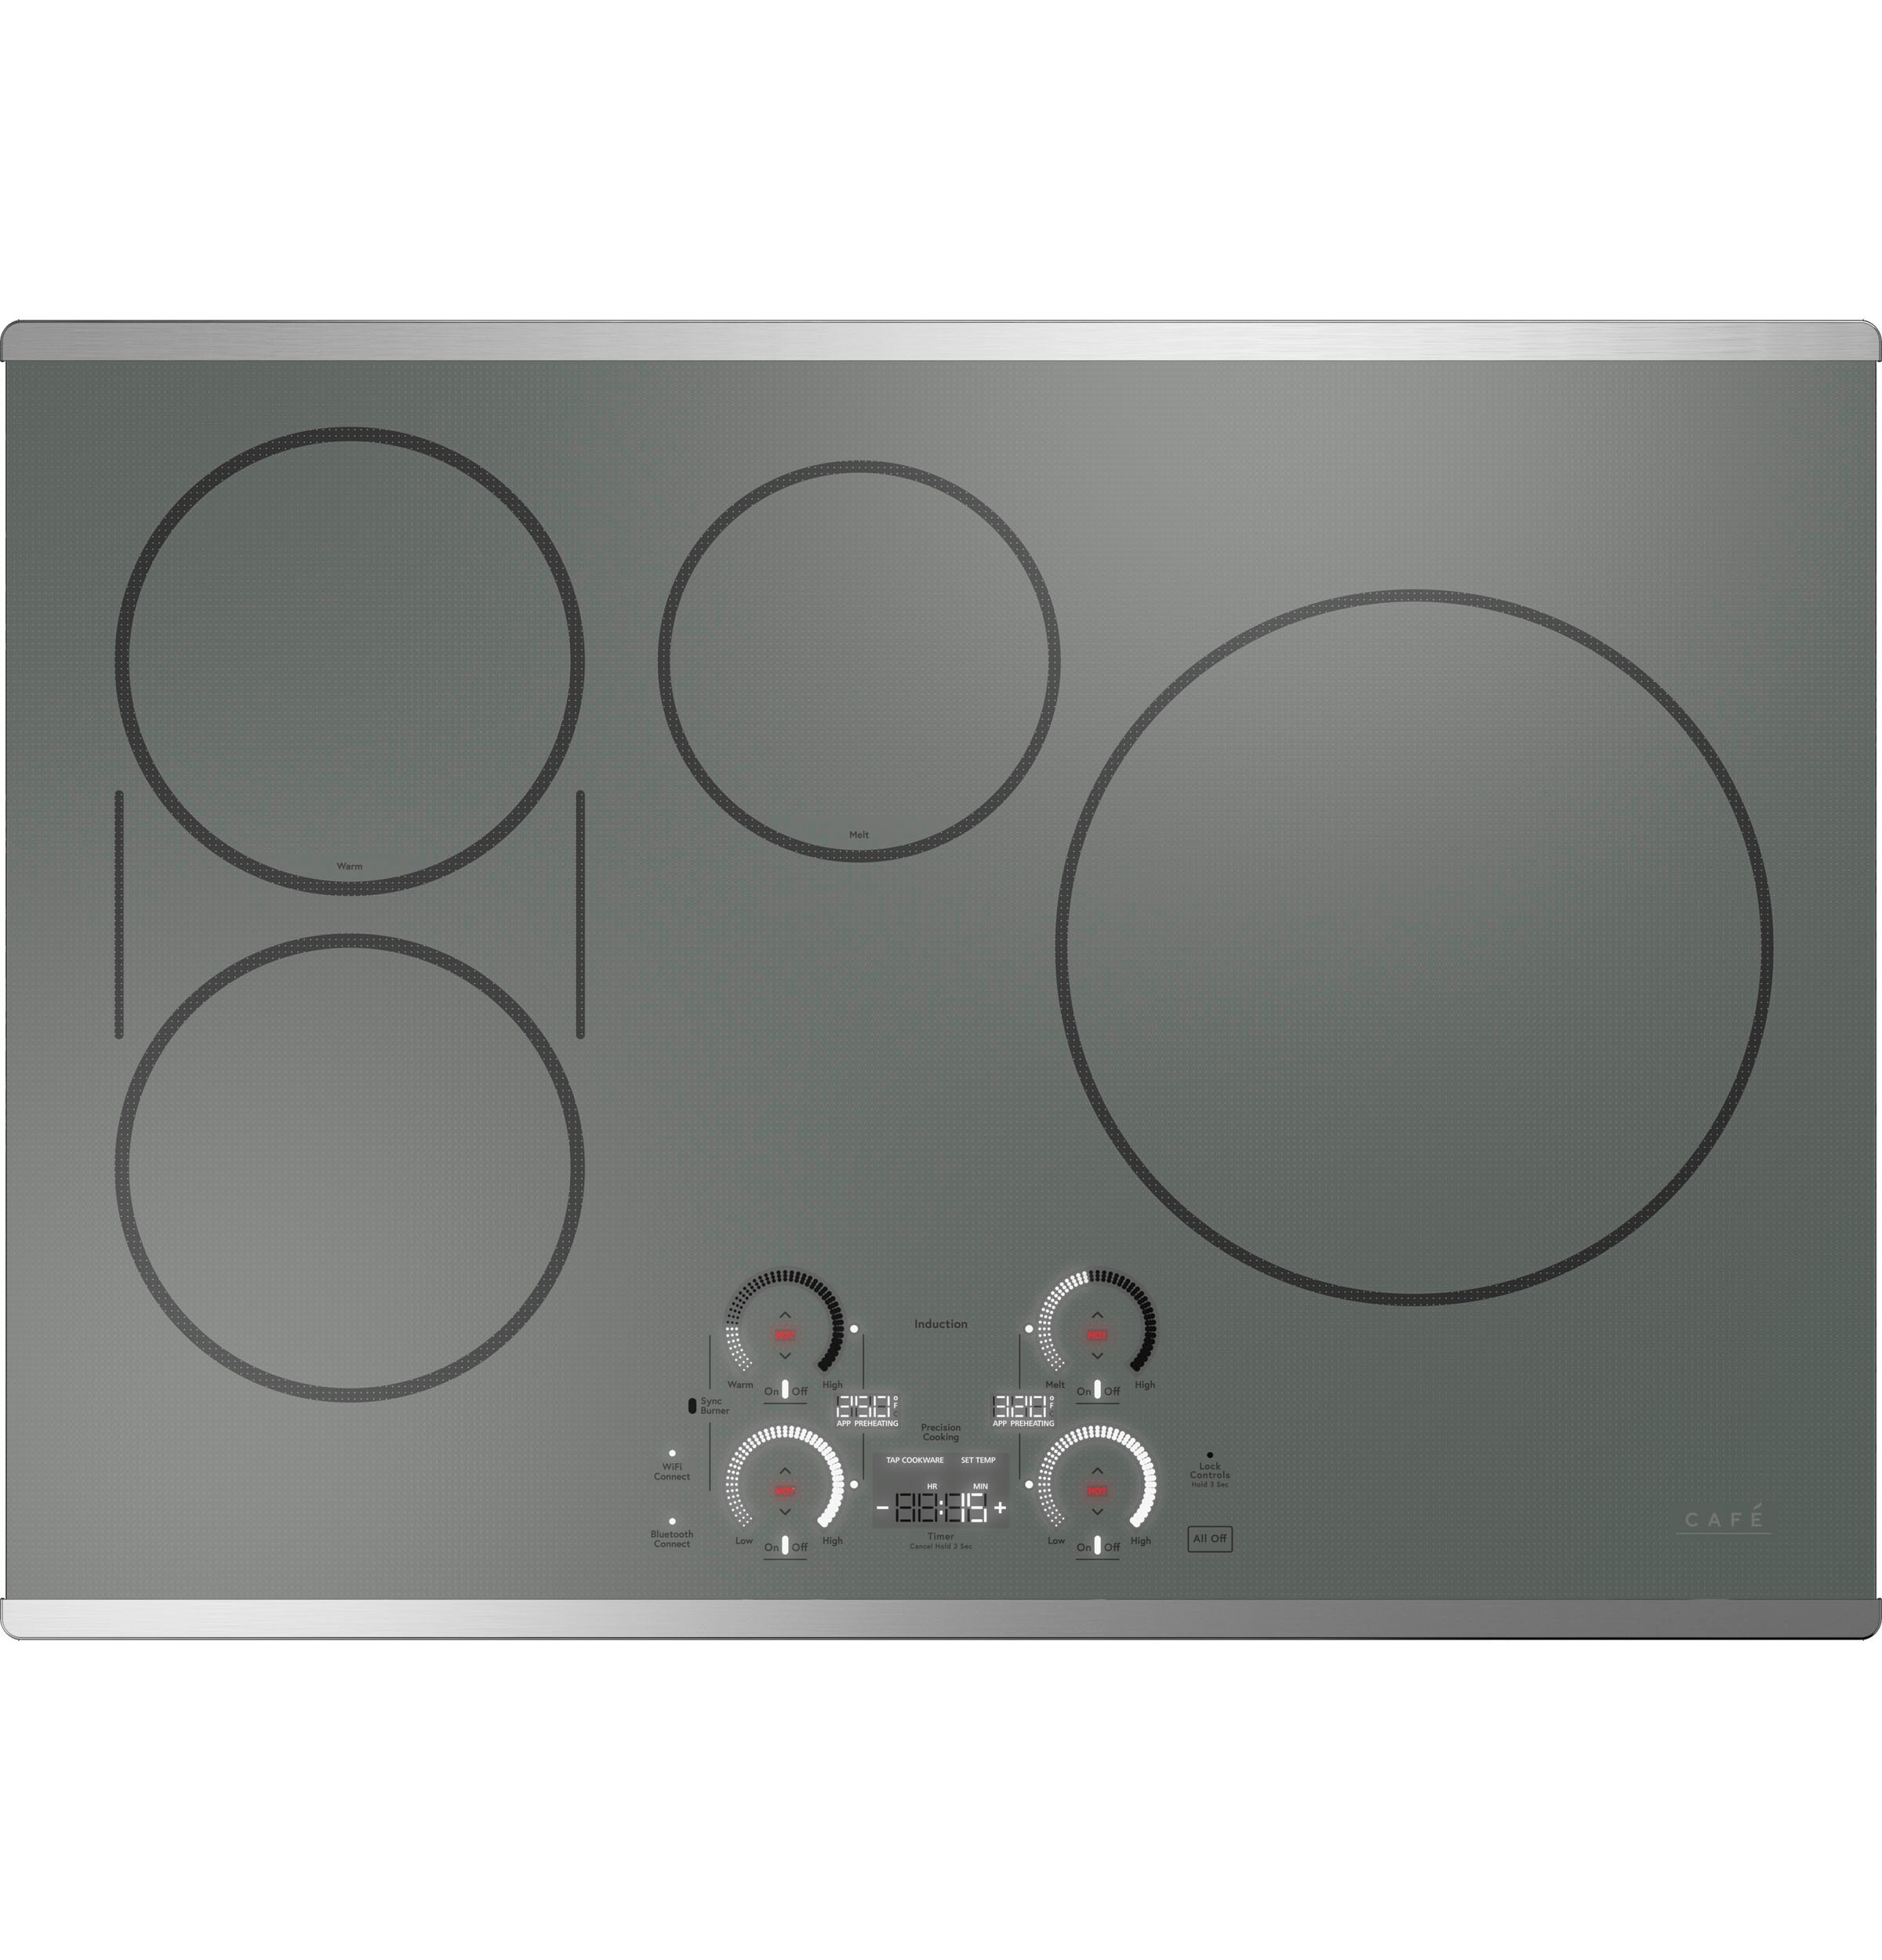 GE CHP9530SJSS 30 Inch Induction Cooktop with 4 Induction Elements